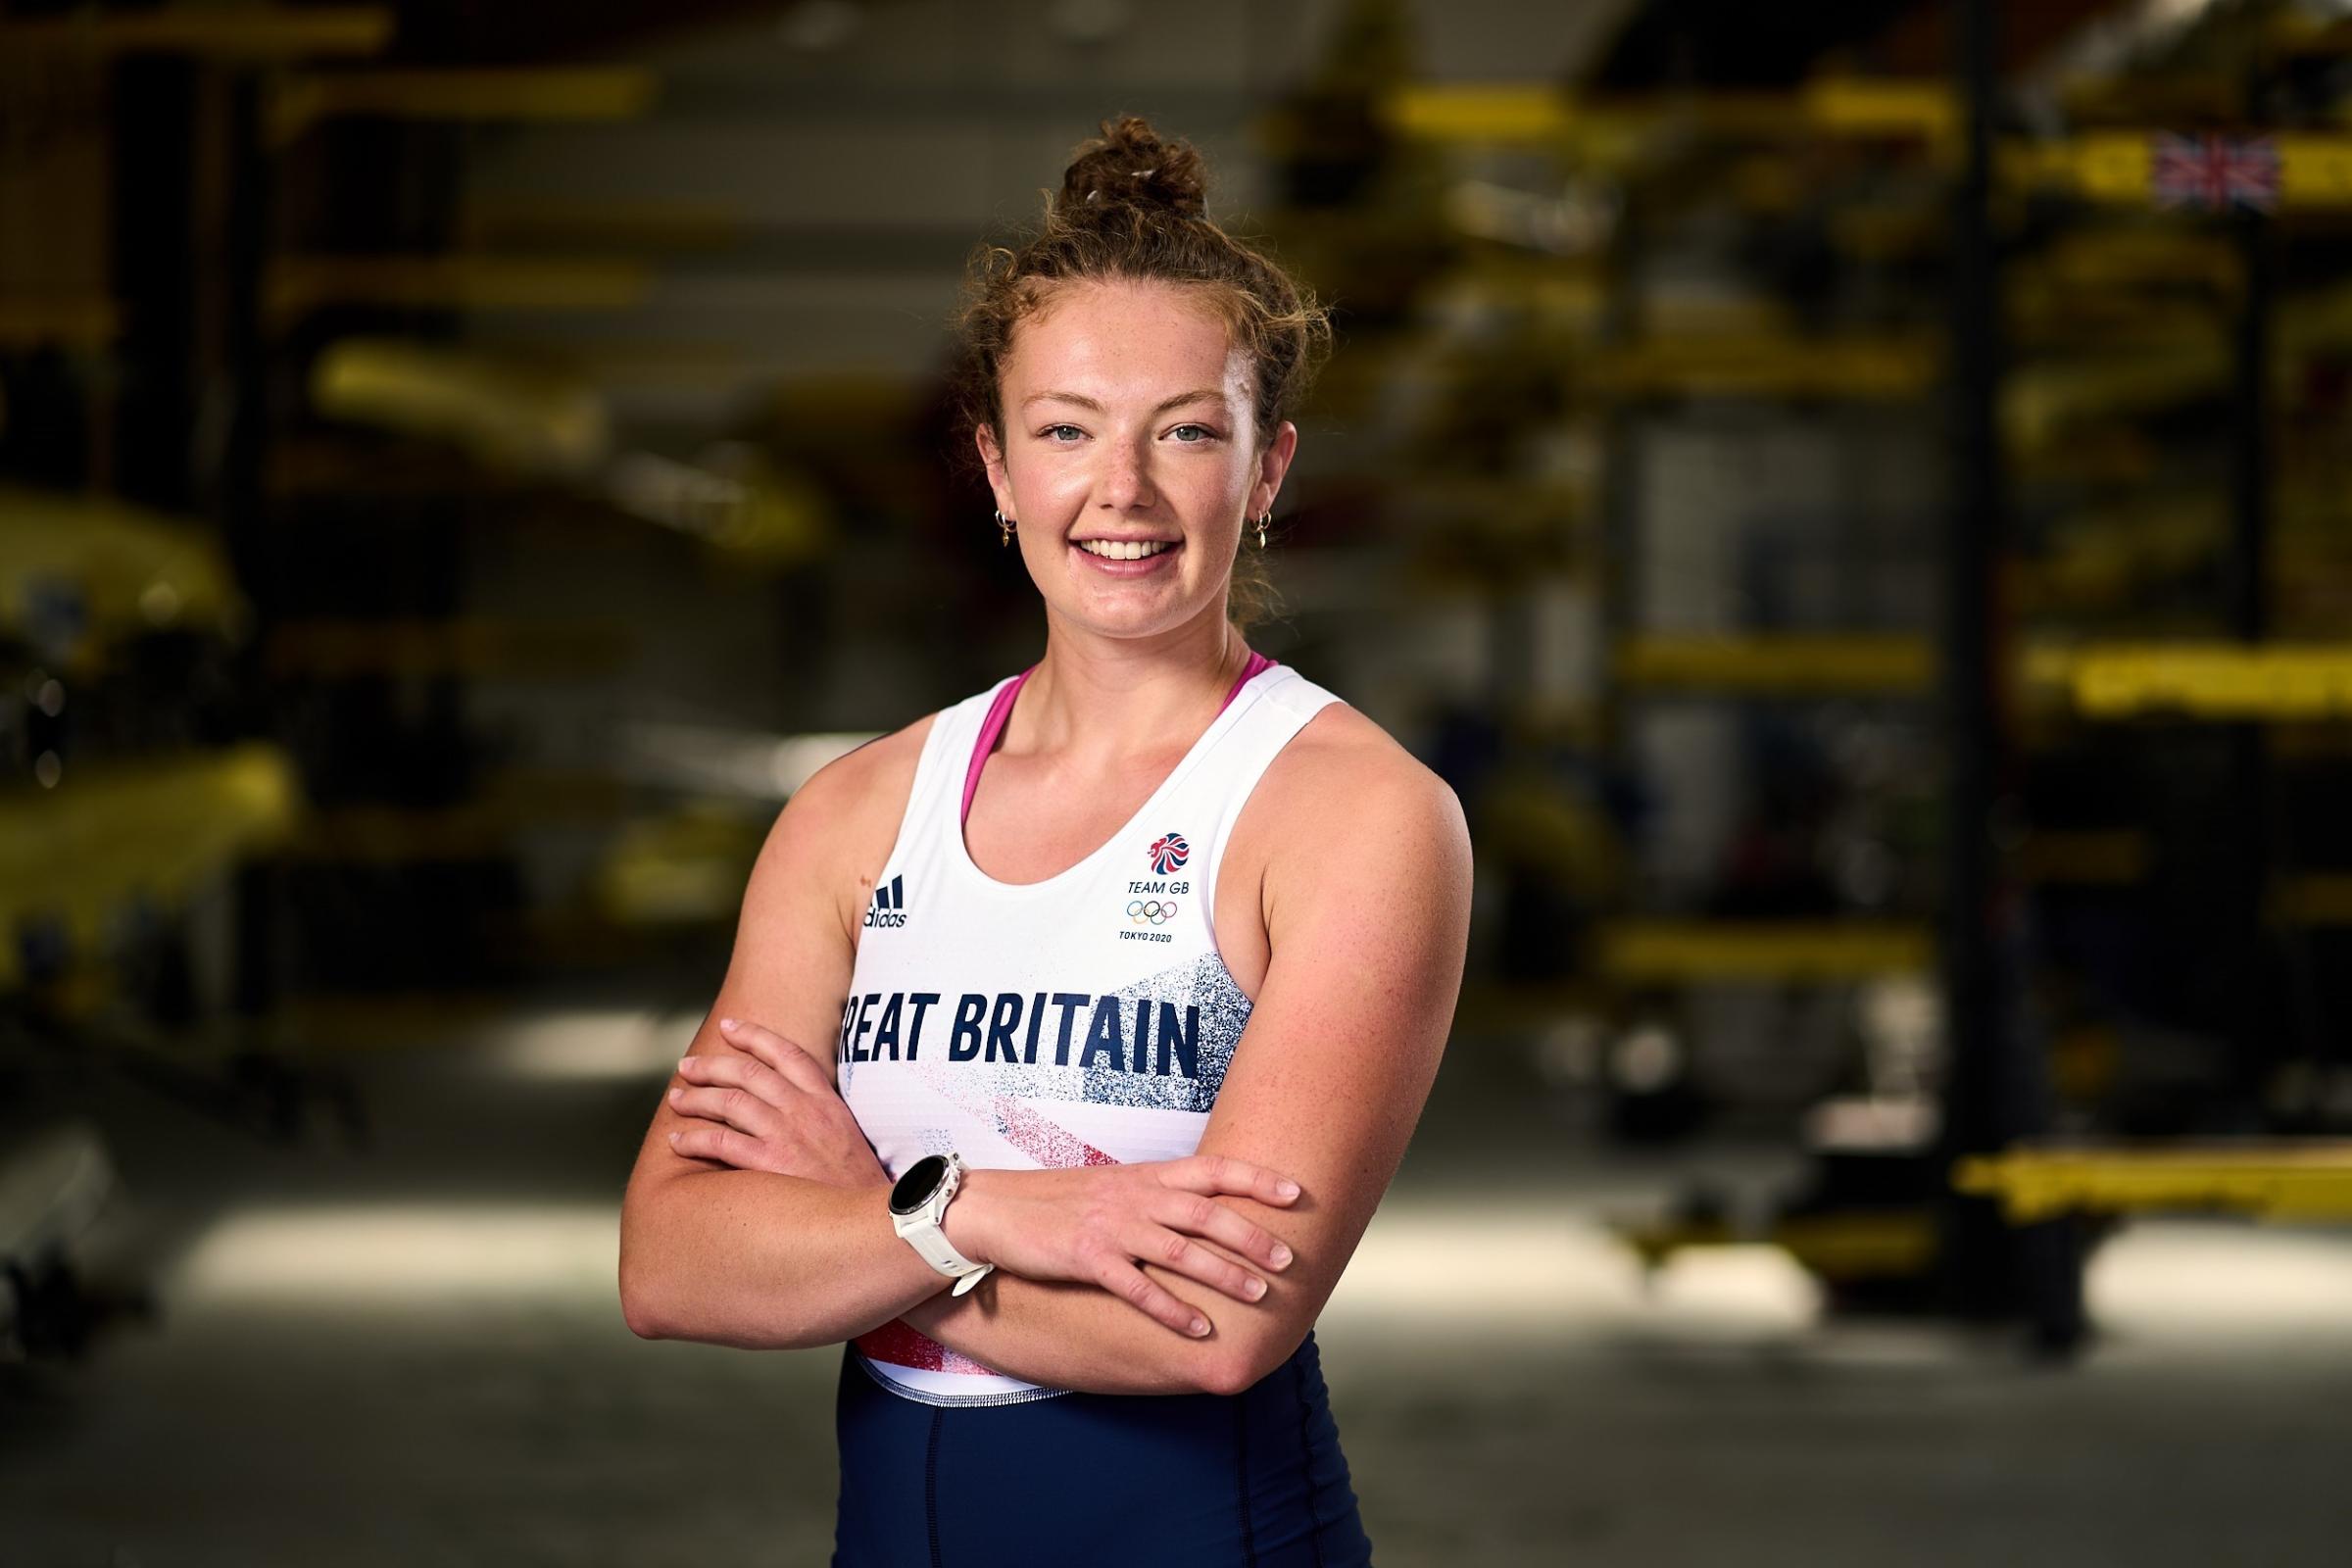 Former Warrington Rowing Club member Lucy Glover made her Olympic debut this summer